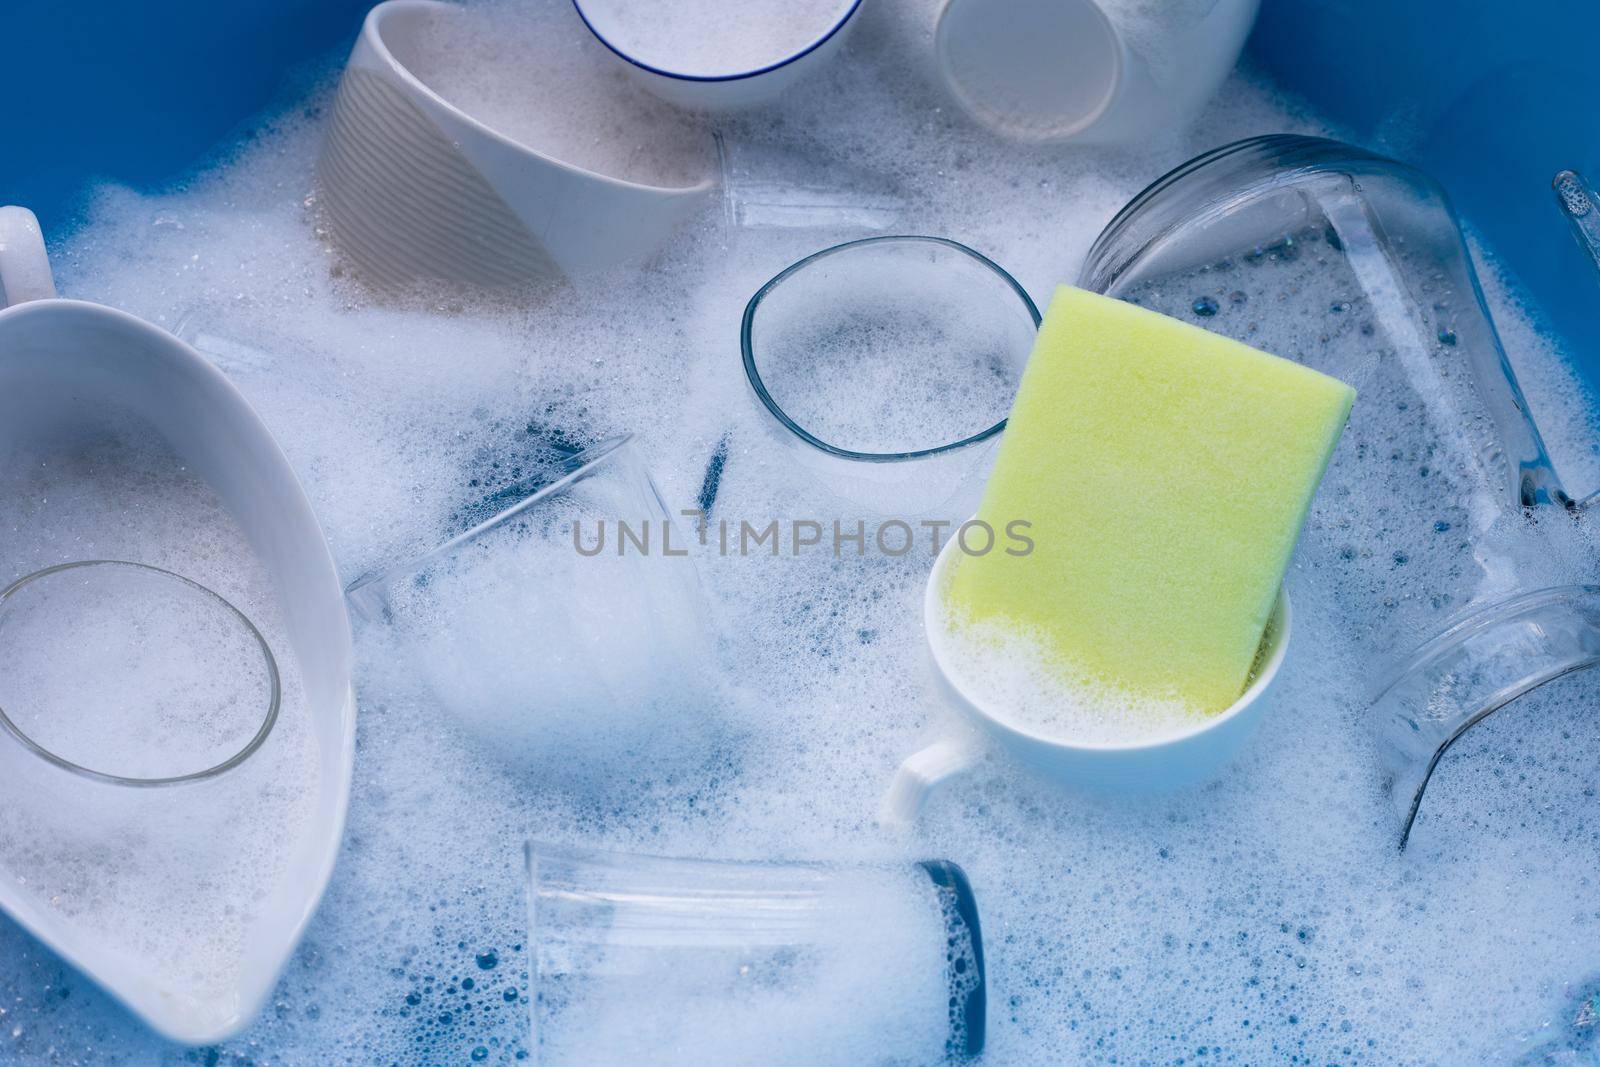 Washing used drinking glasses and cups with yellow sponge by Bowonpat